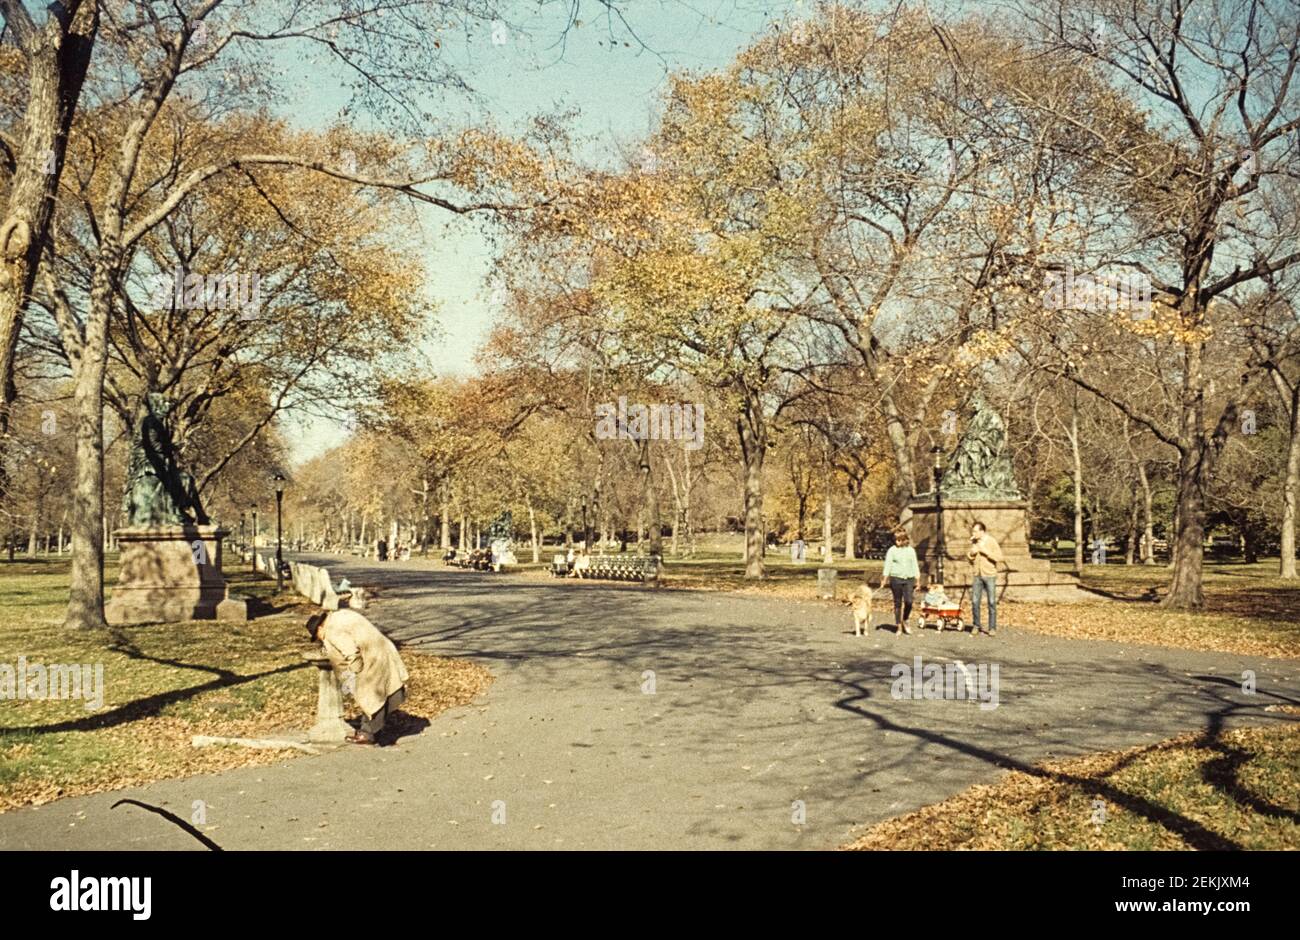 Few people are on the way. A man is drinking from a fountain. A familiy goes for a walk. Literary Walk, Manhattan, Central Park, New York City, 1965 Stock Photo